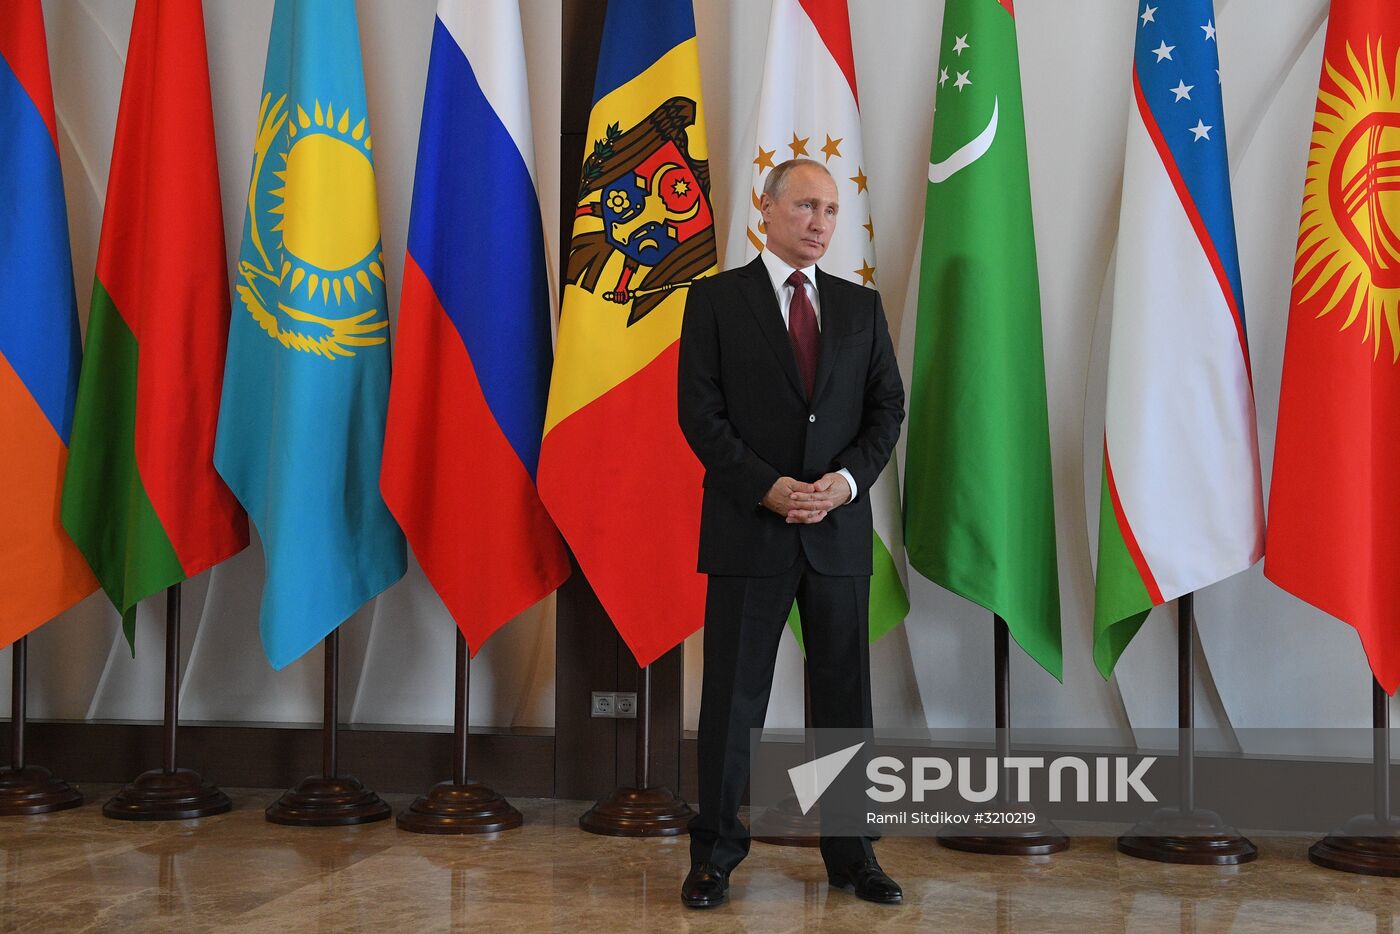 President Vladimir Putin at CIS Council of Heads of State Meeting